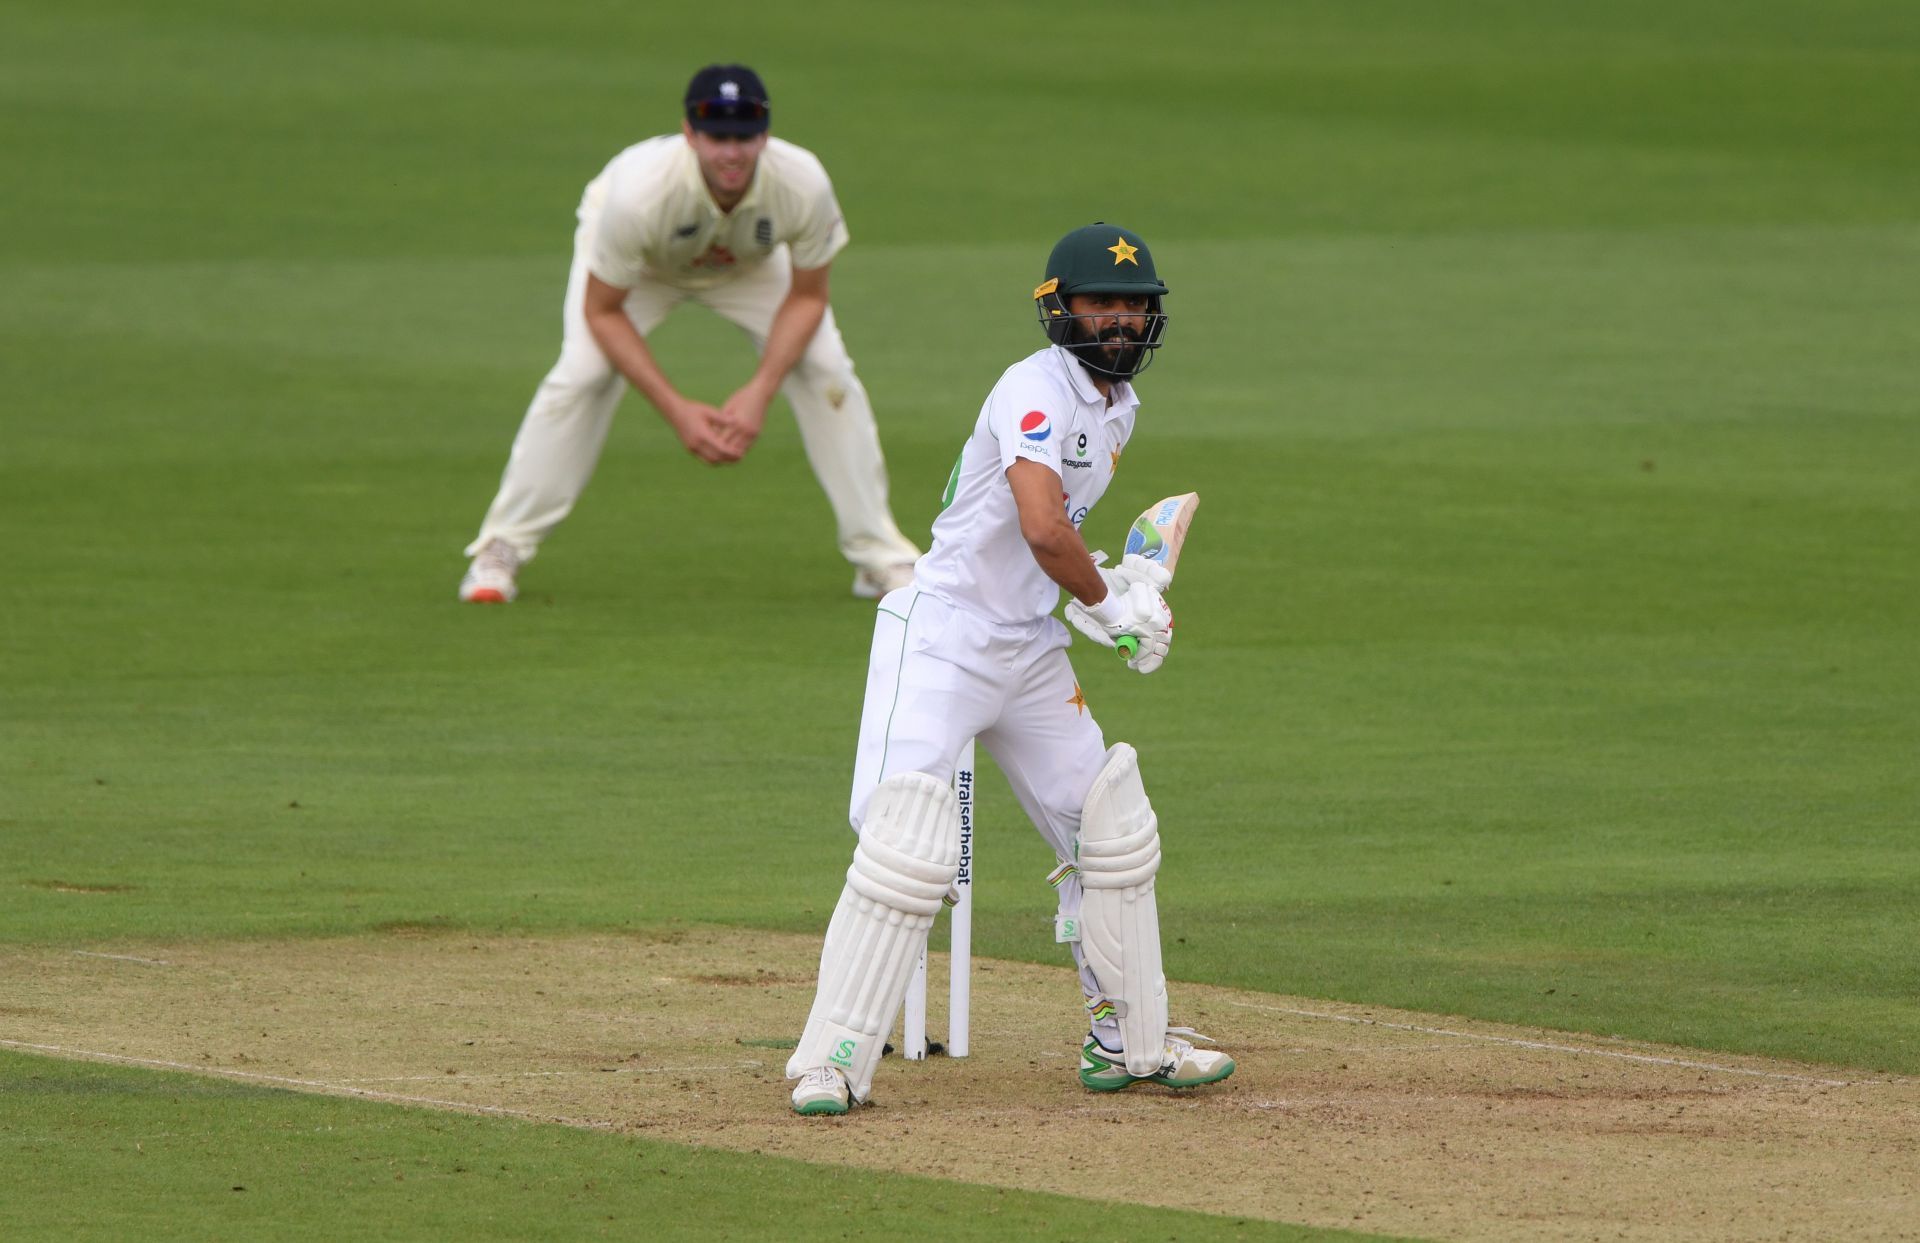 Fawad Alam has a stance similar to Shivnarine Chanderpaul (Image courtesy: Getty Images)